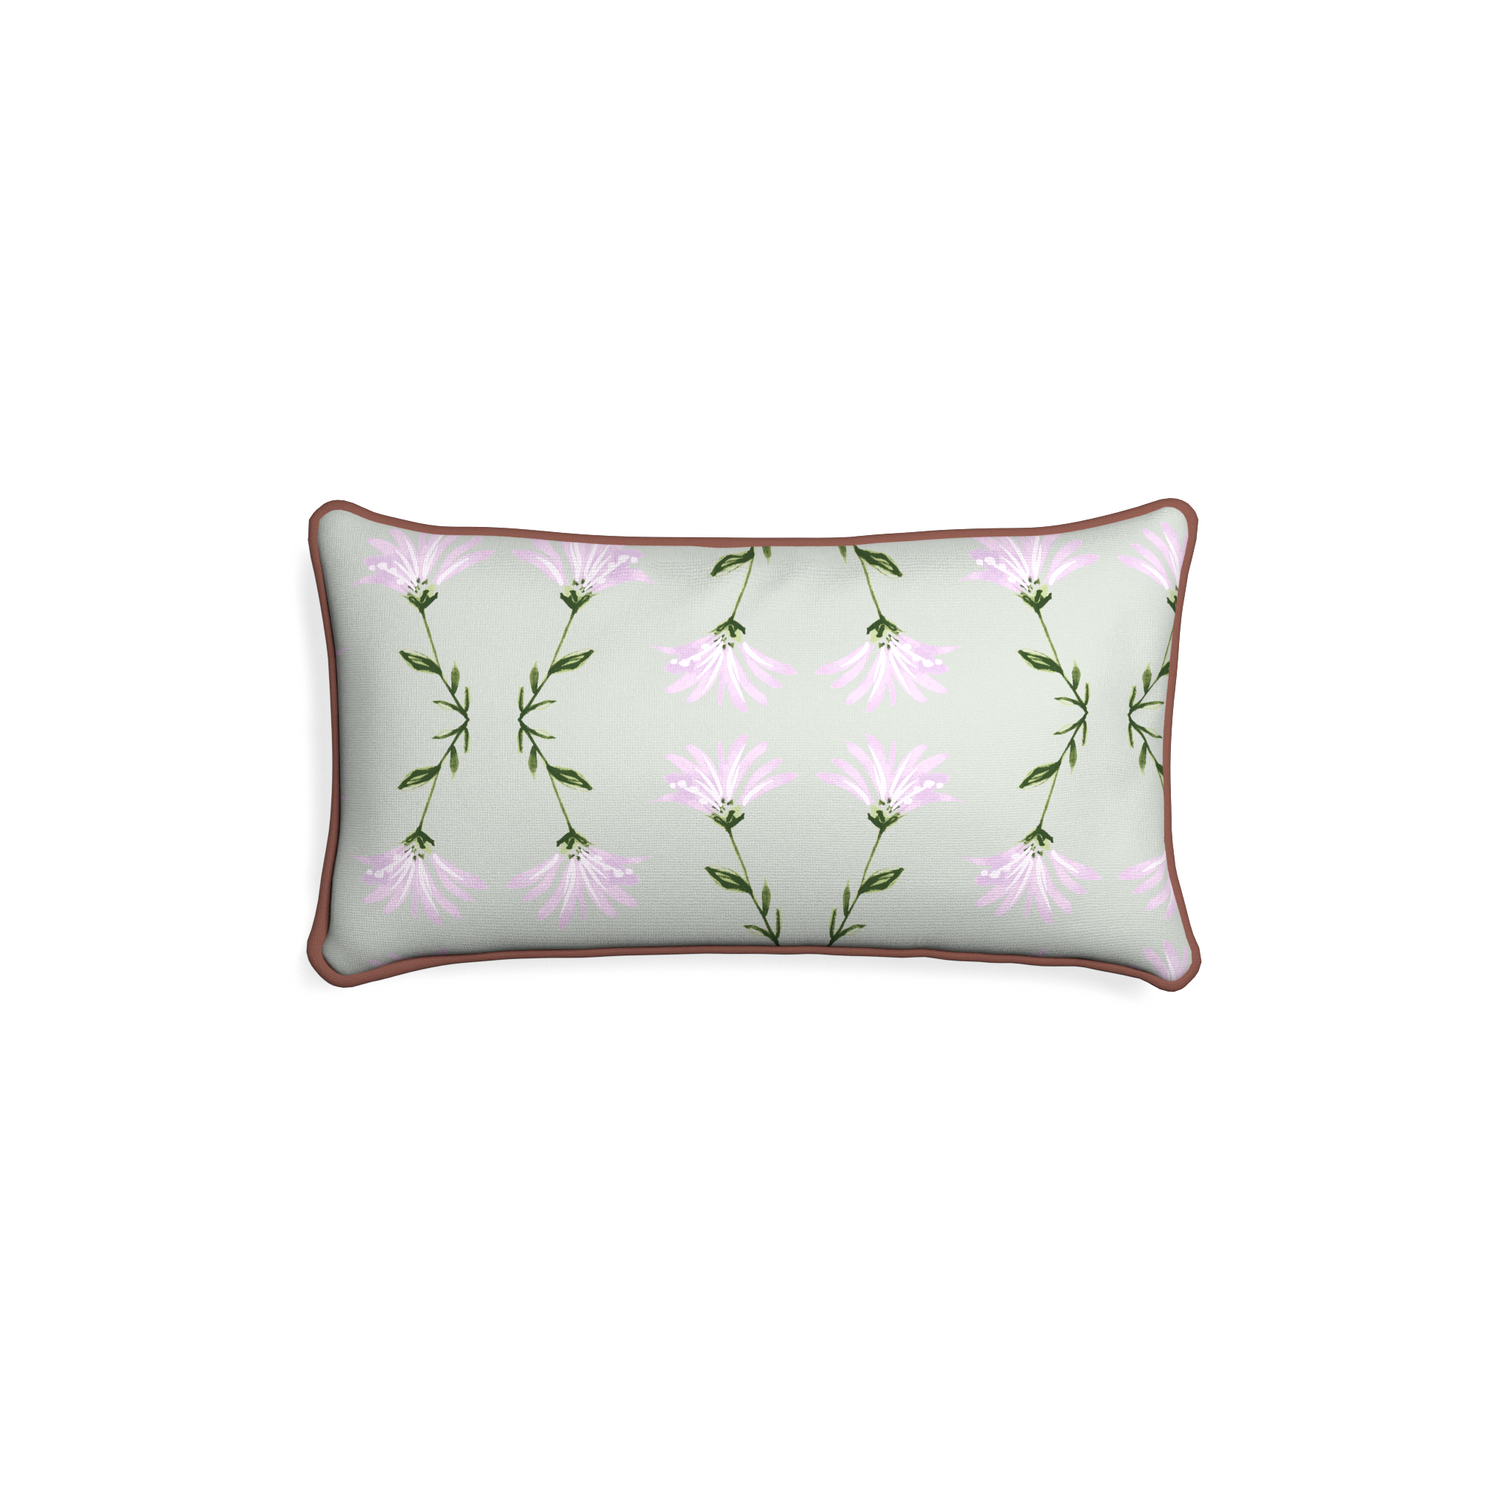 Lumbar marina sage custom pillow with w piping on white background